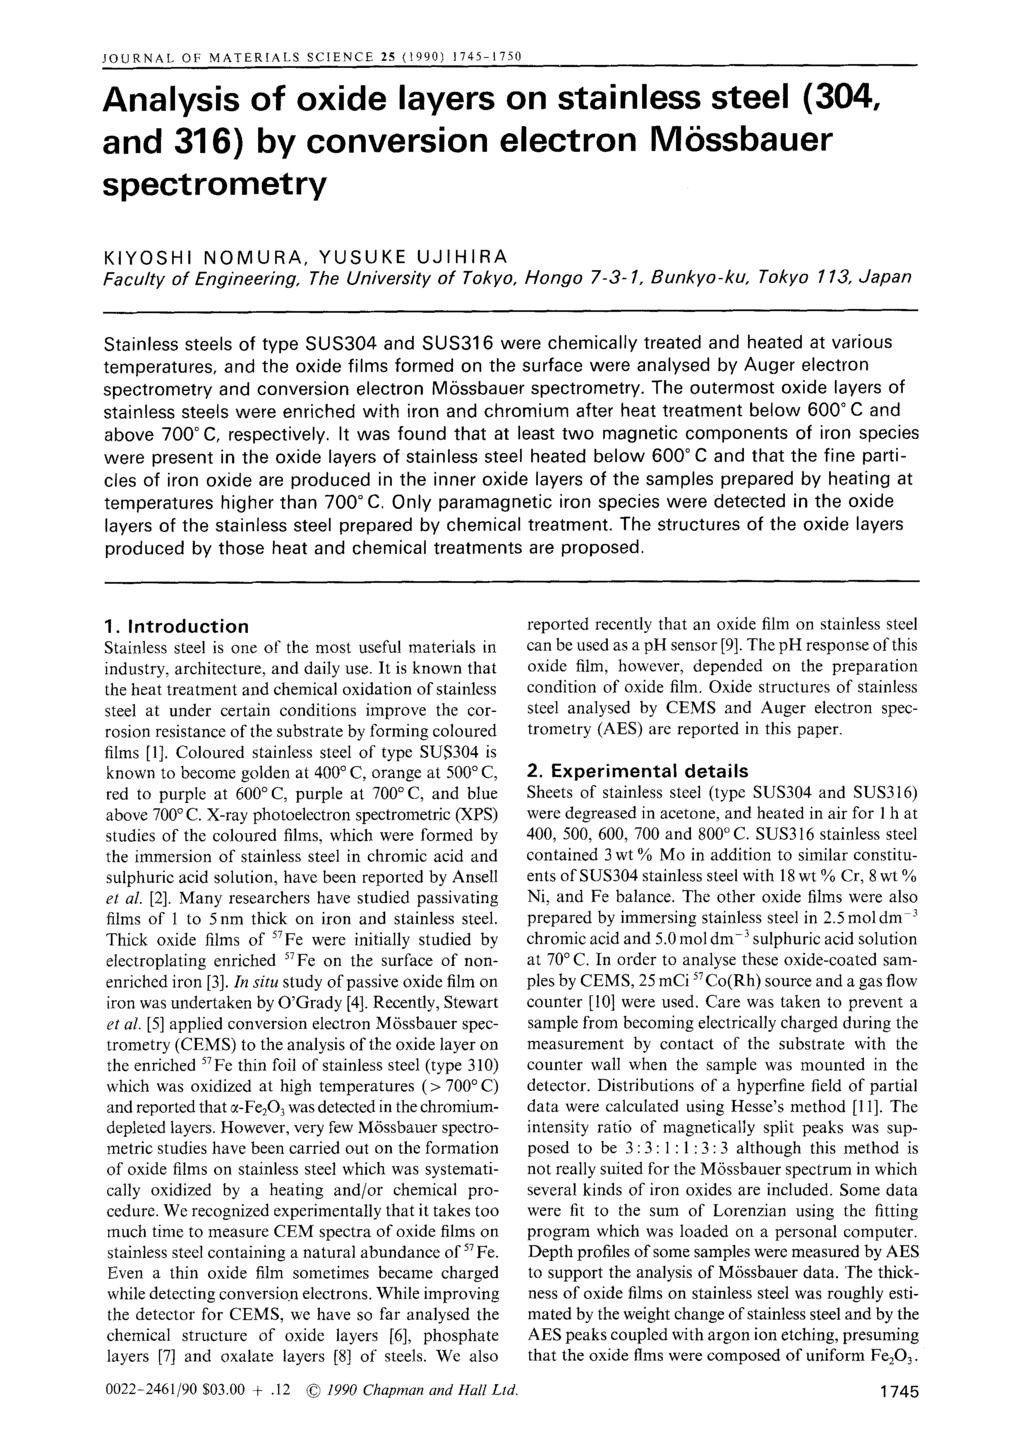 JOURNAL OF MATERIALS SCIENCE 25 (1990) 1745-1750 Analysis f xide layers n stainless steel (304, and 316) by cnversin electrn IVl6ssbauer spectrmetry KIYOSHI NOMURA, YUSUKE UJIHIRA Faculty f